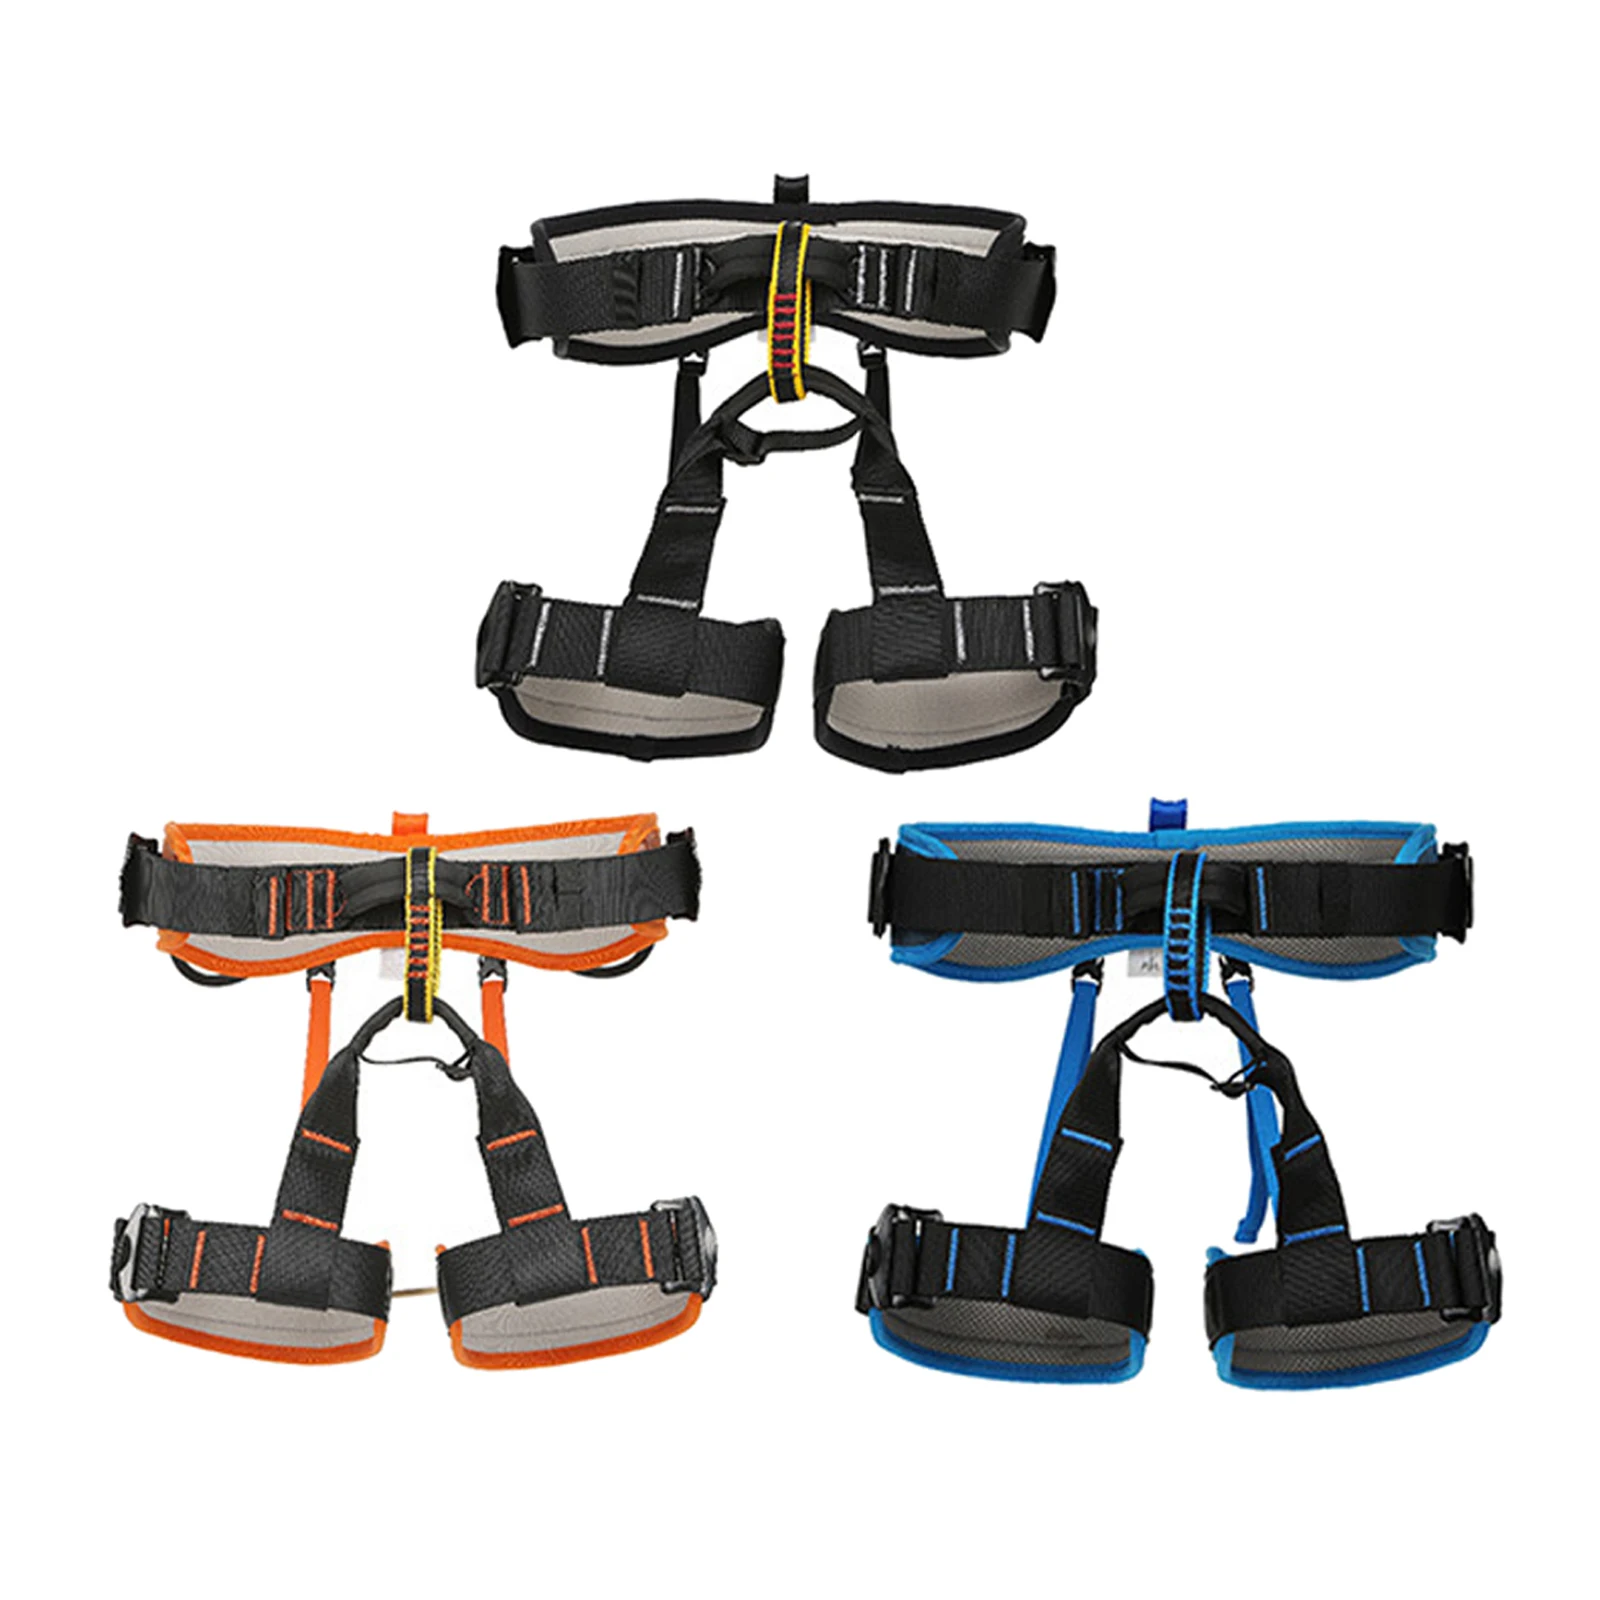 

Deluxe Mountaineering Climbing Harness, Wider Half Body Waist Safety Harness, Fire Rescuing Rock Climbing Safety Gear